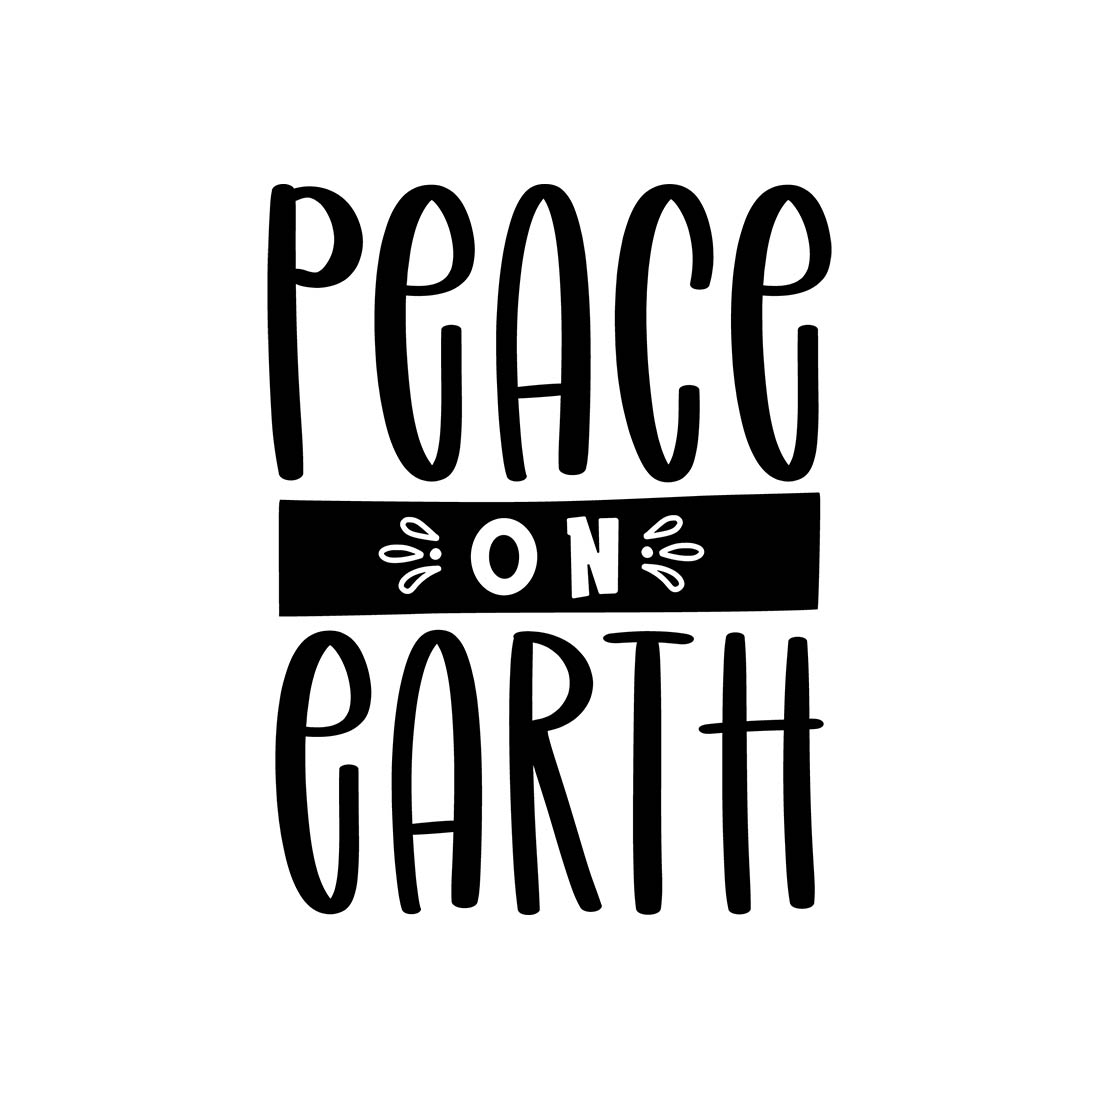 Image with amazing black lettering for Peace on Earth prints.